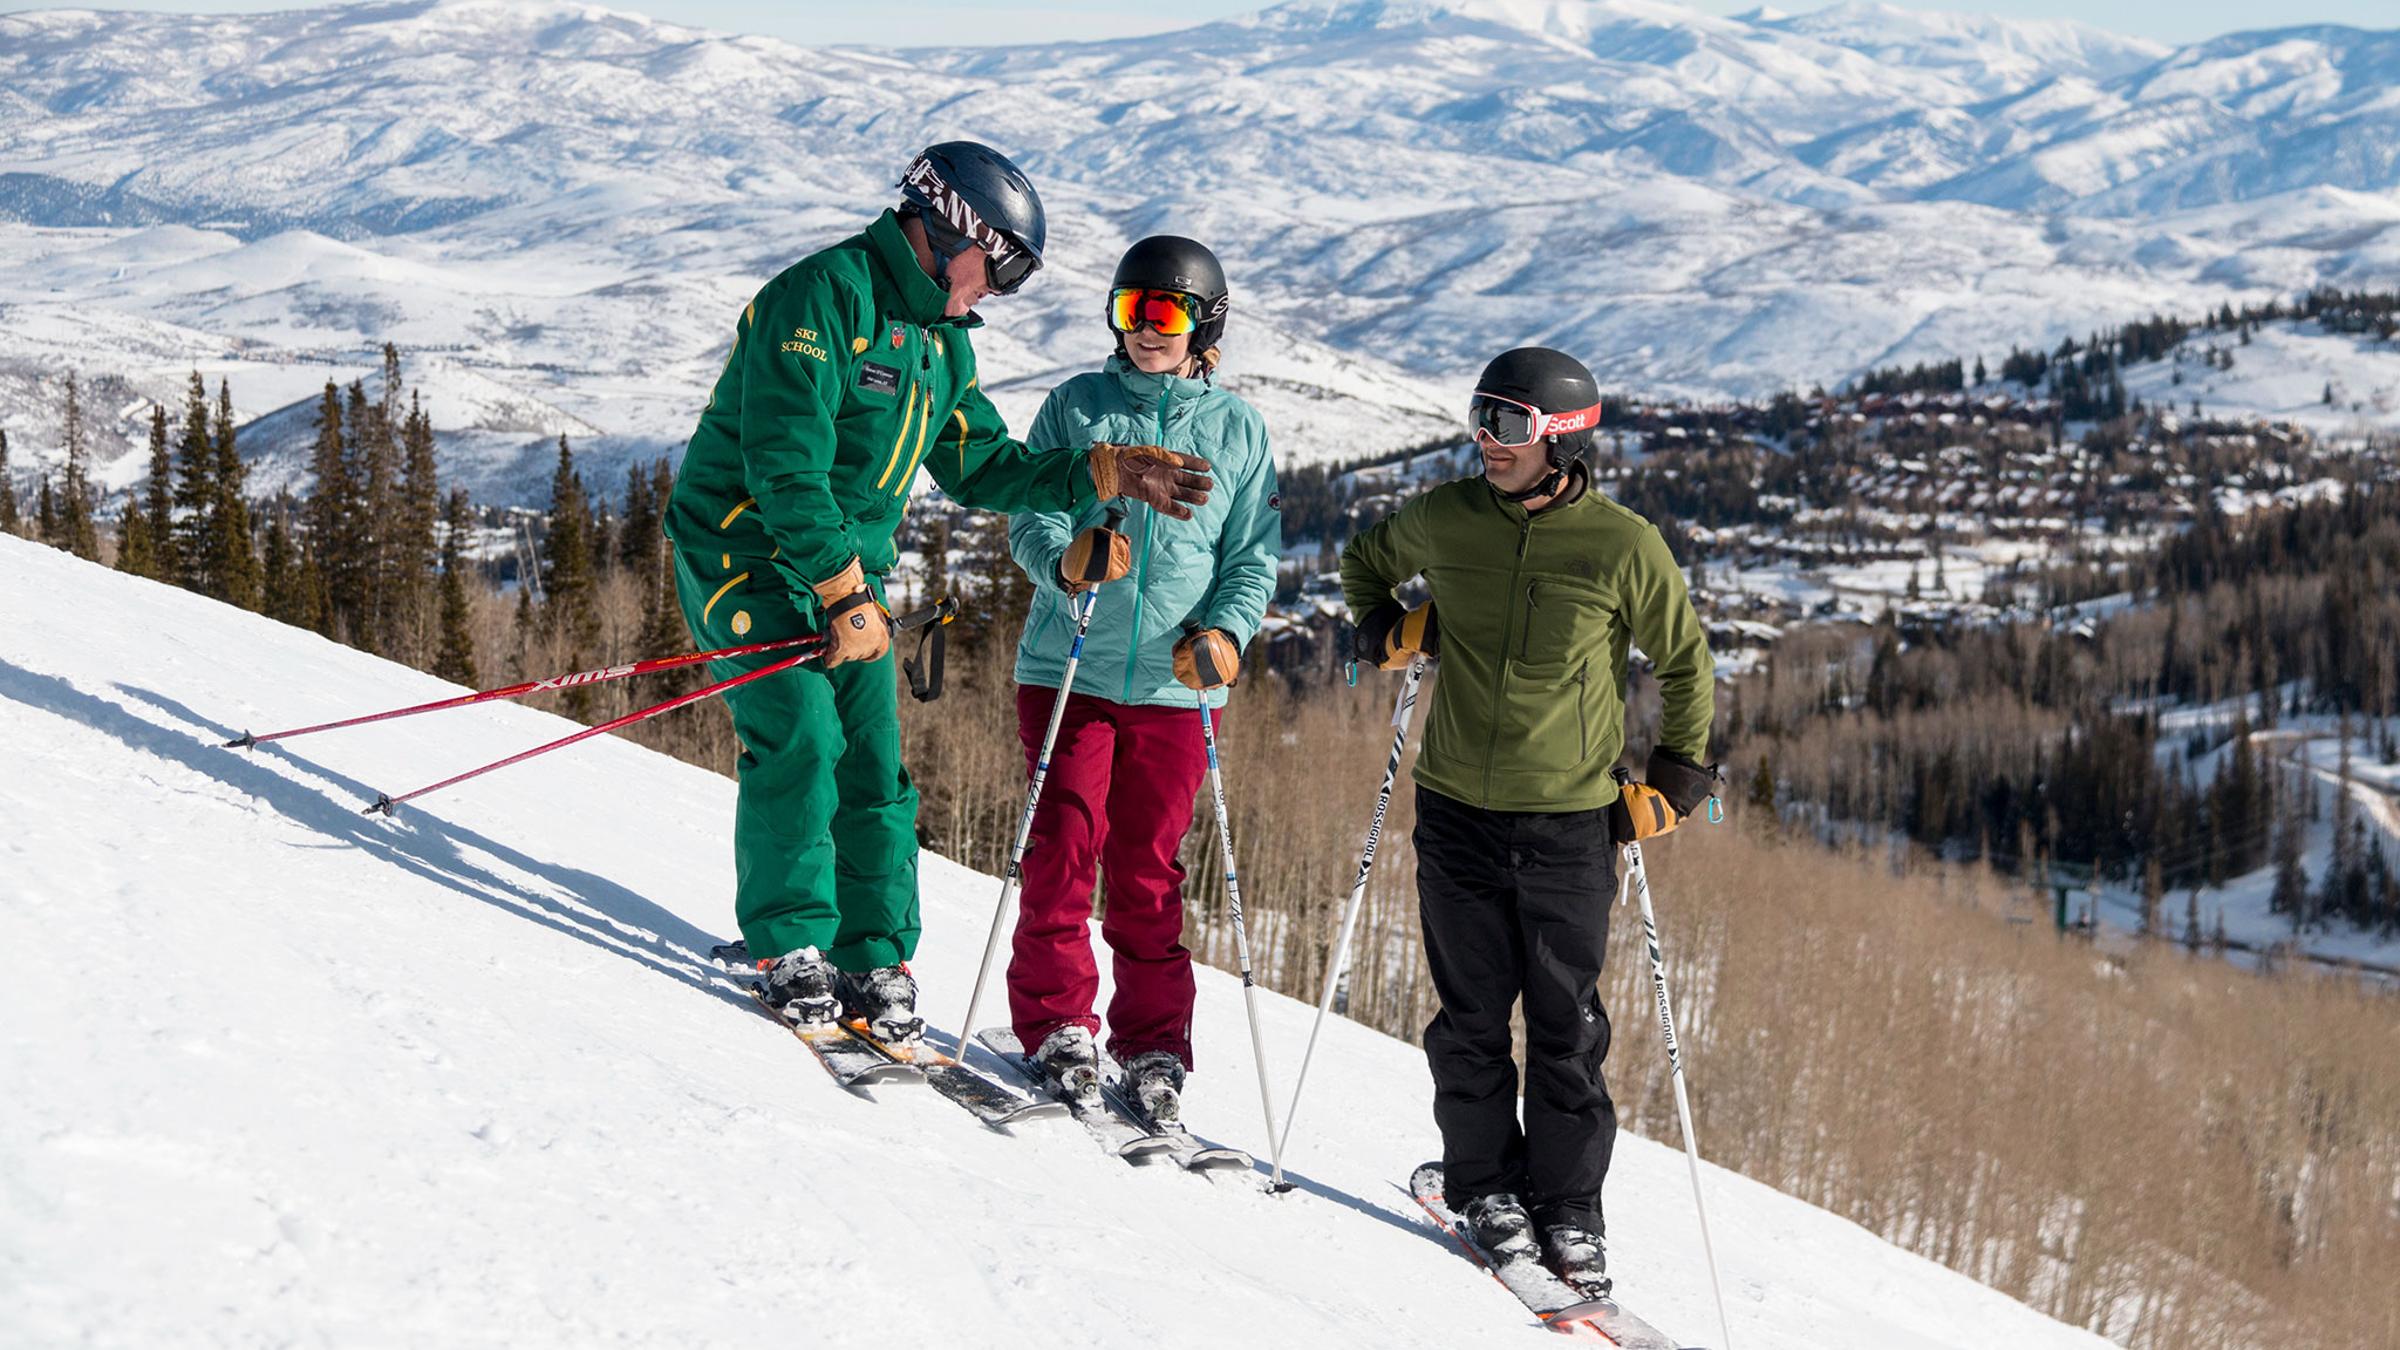 Max 4 group lesson at Deer Valley Resort